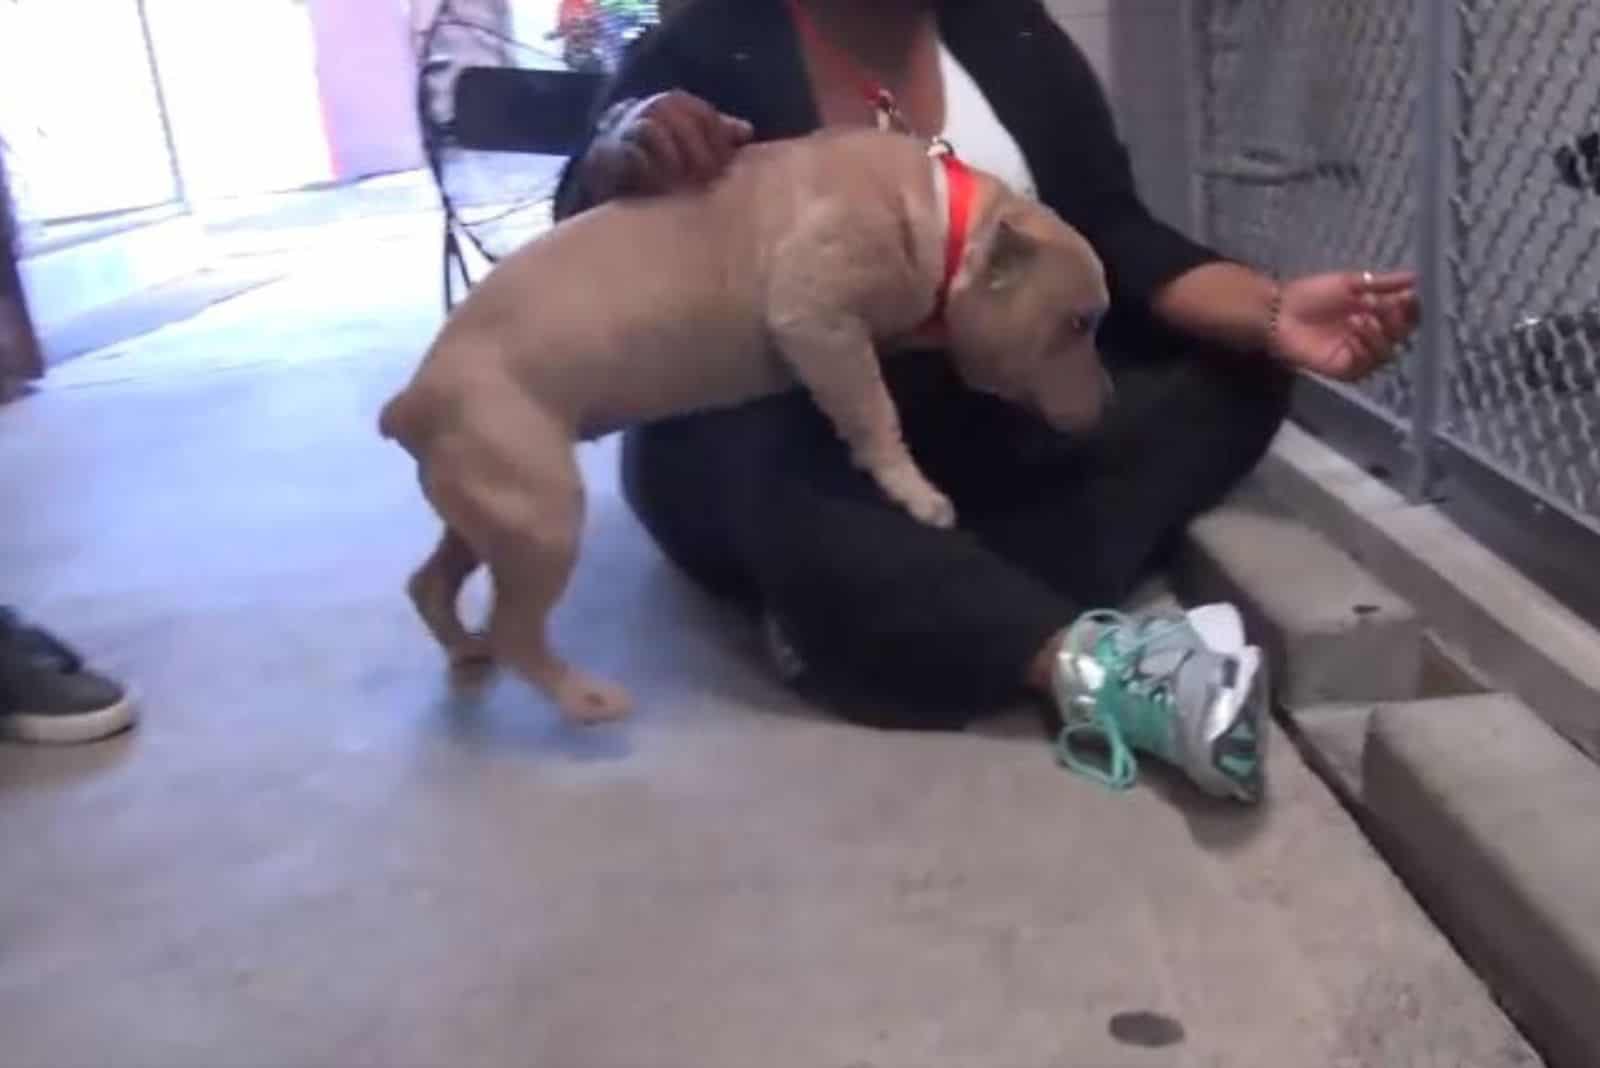 pitbull dog playing with a woman sitting on the floor